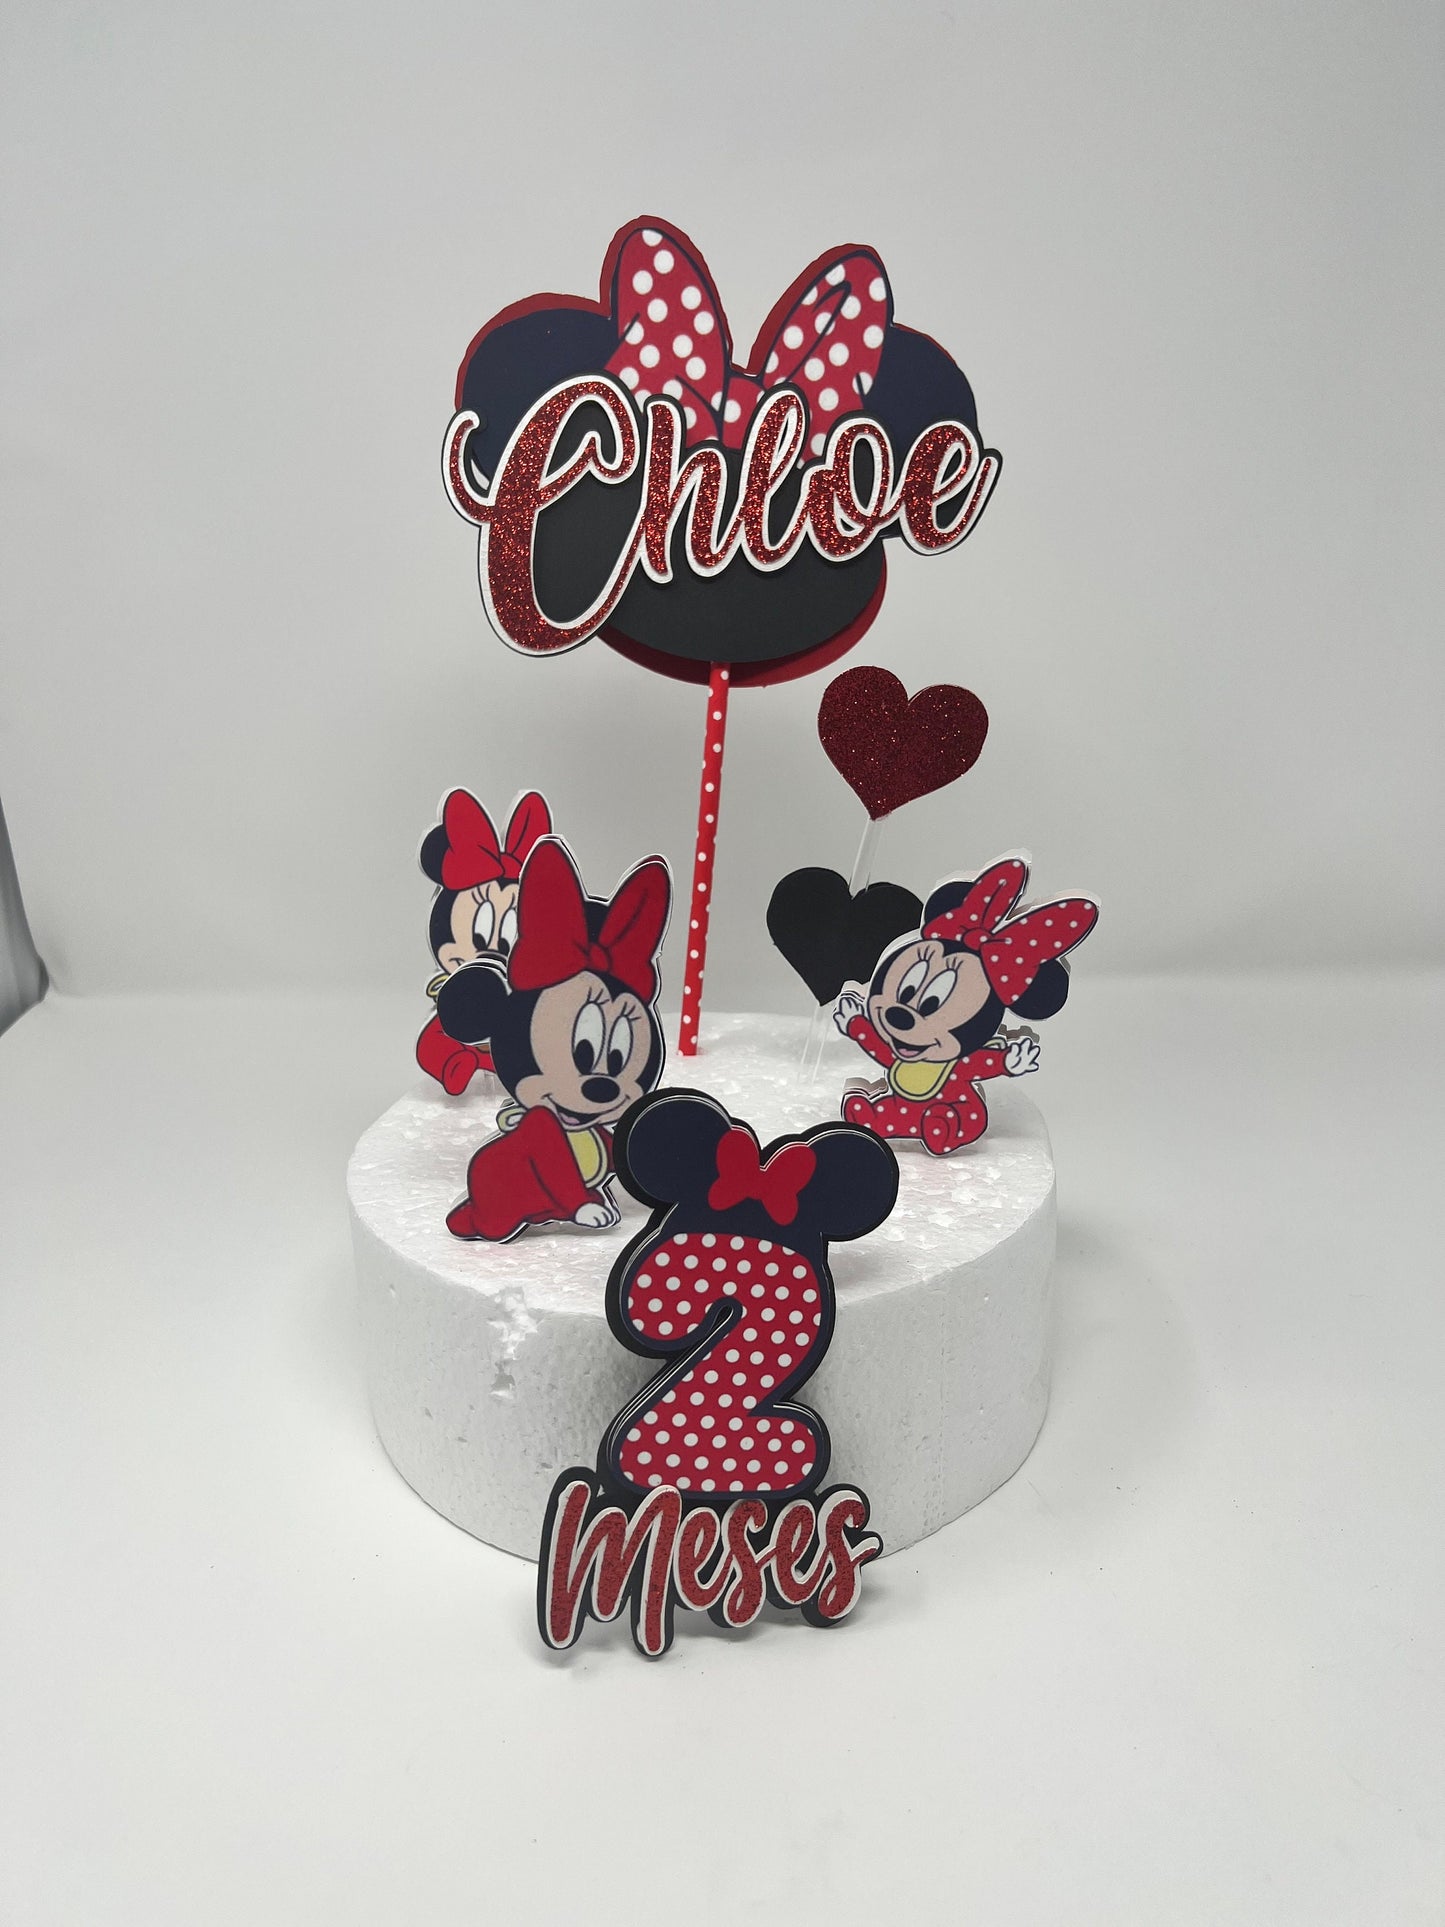 Minnie mouse cake toppers ❤️